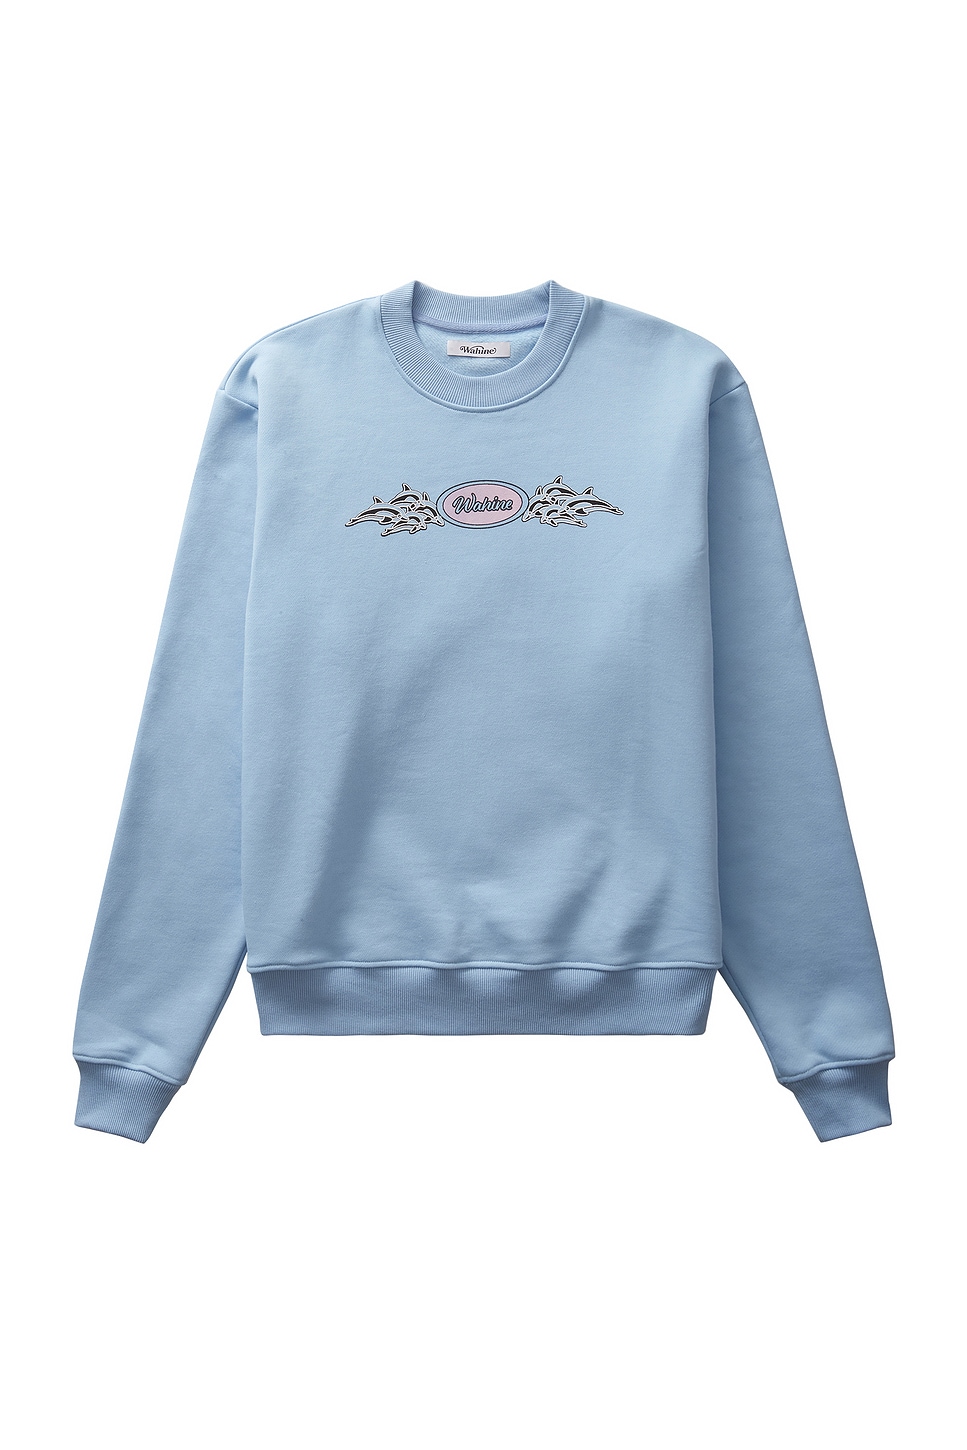 Image 1 of Wahine Dolphin Sweater in Powder Blue